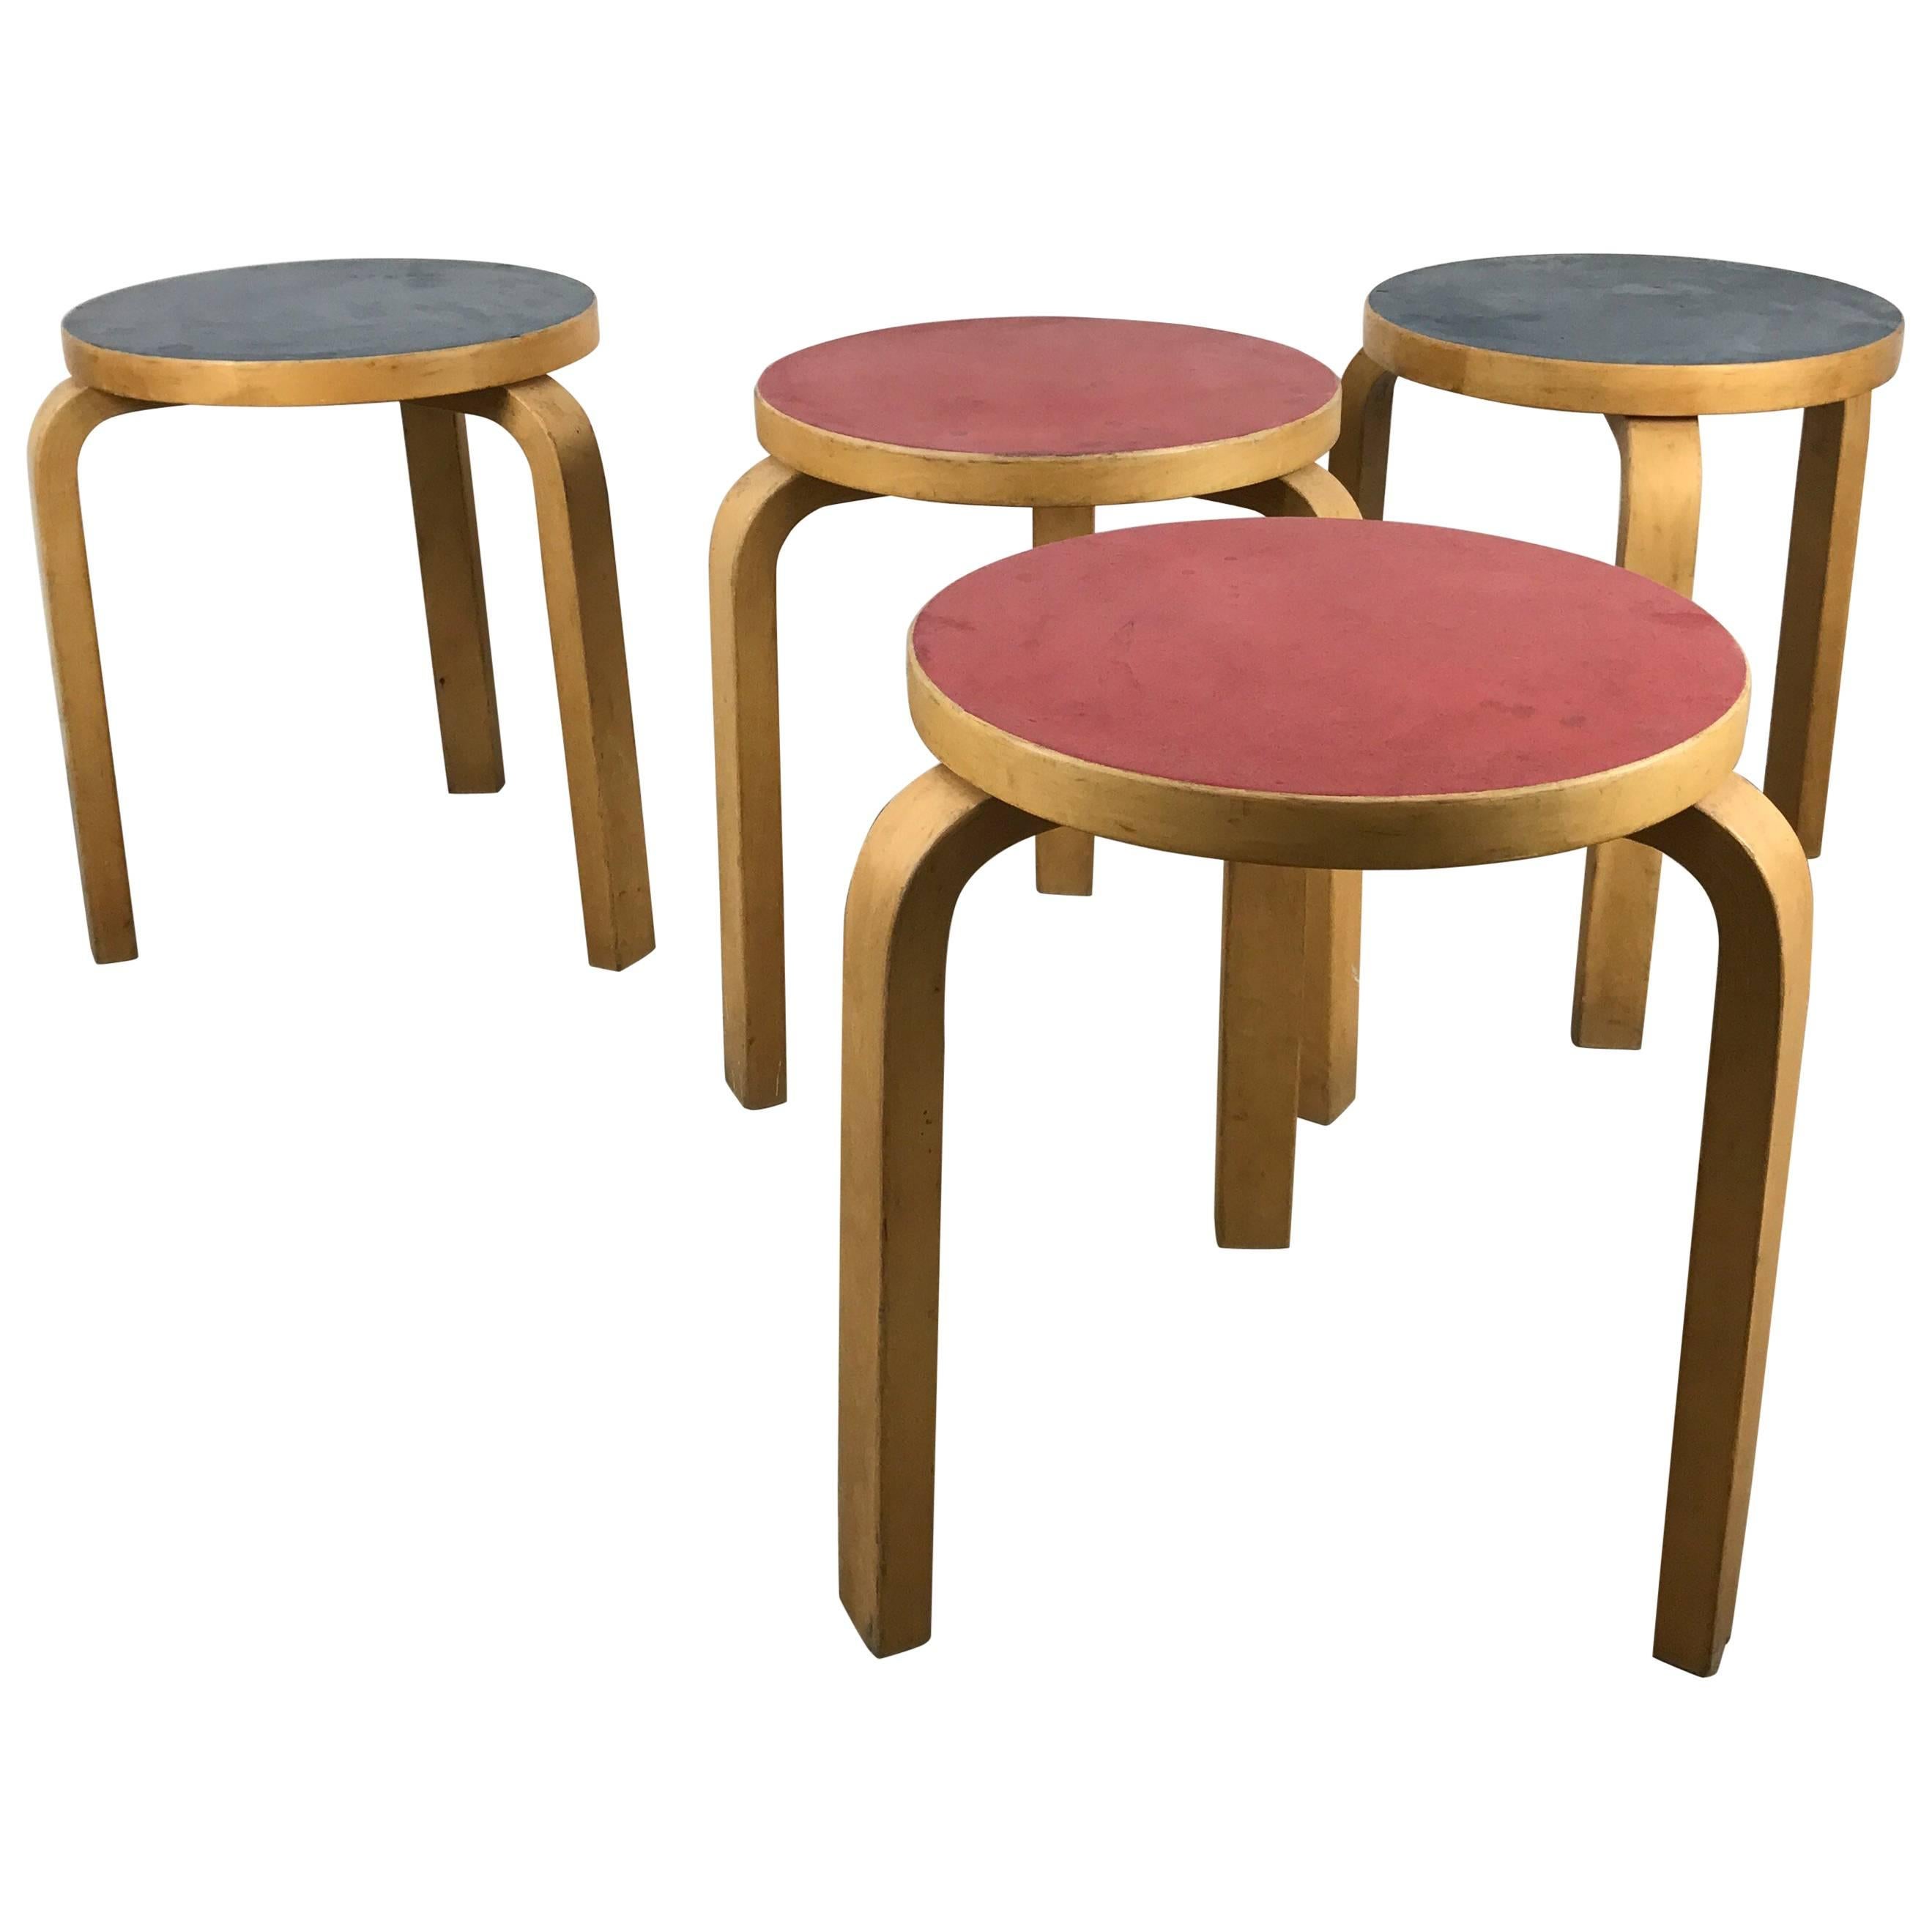 Four Stacking Stools, Model 60 by Alvar Aalto, Designed in 1933